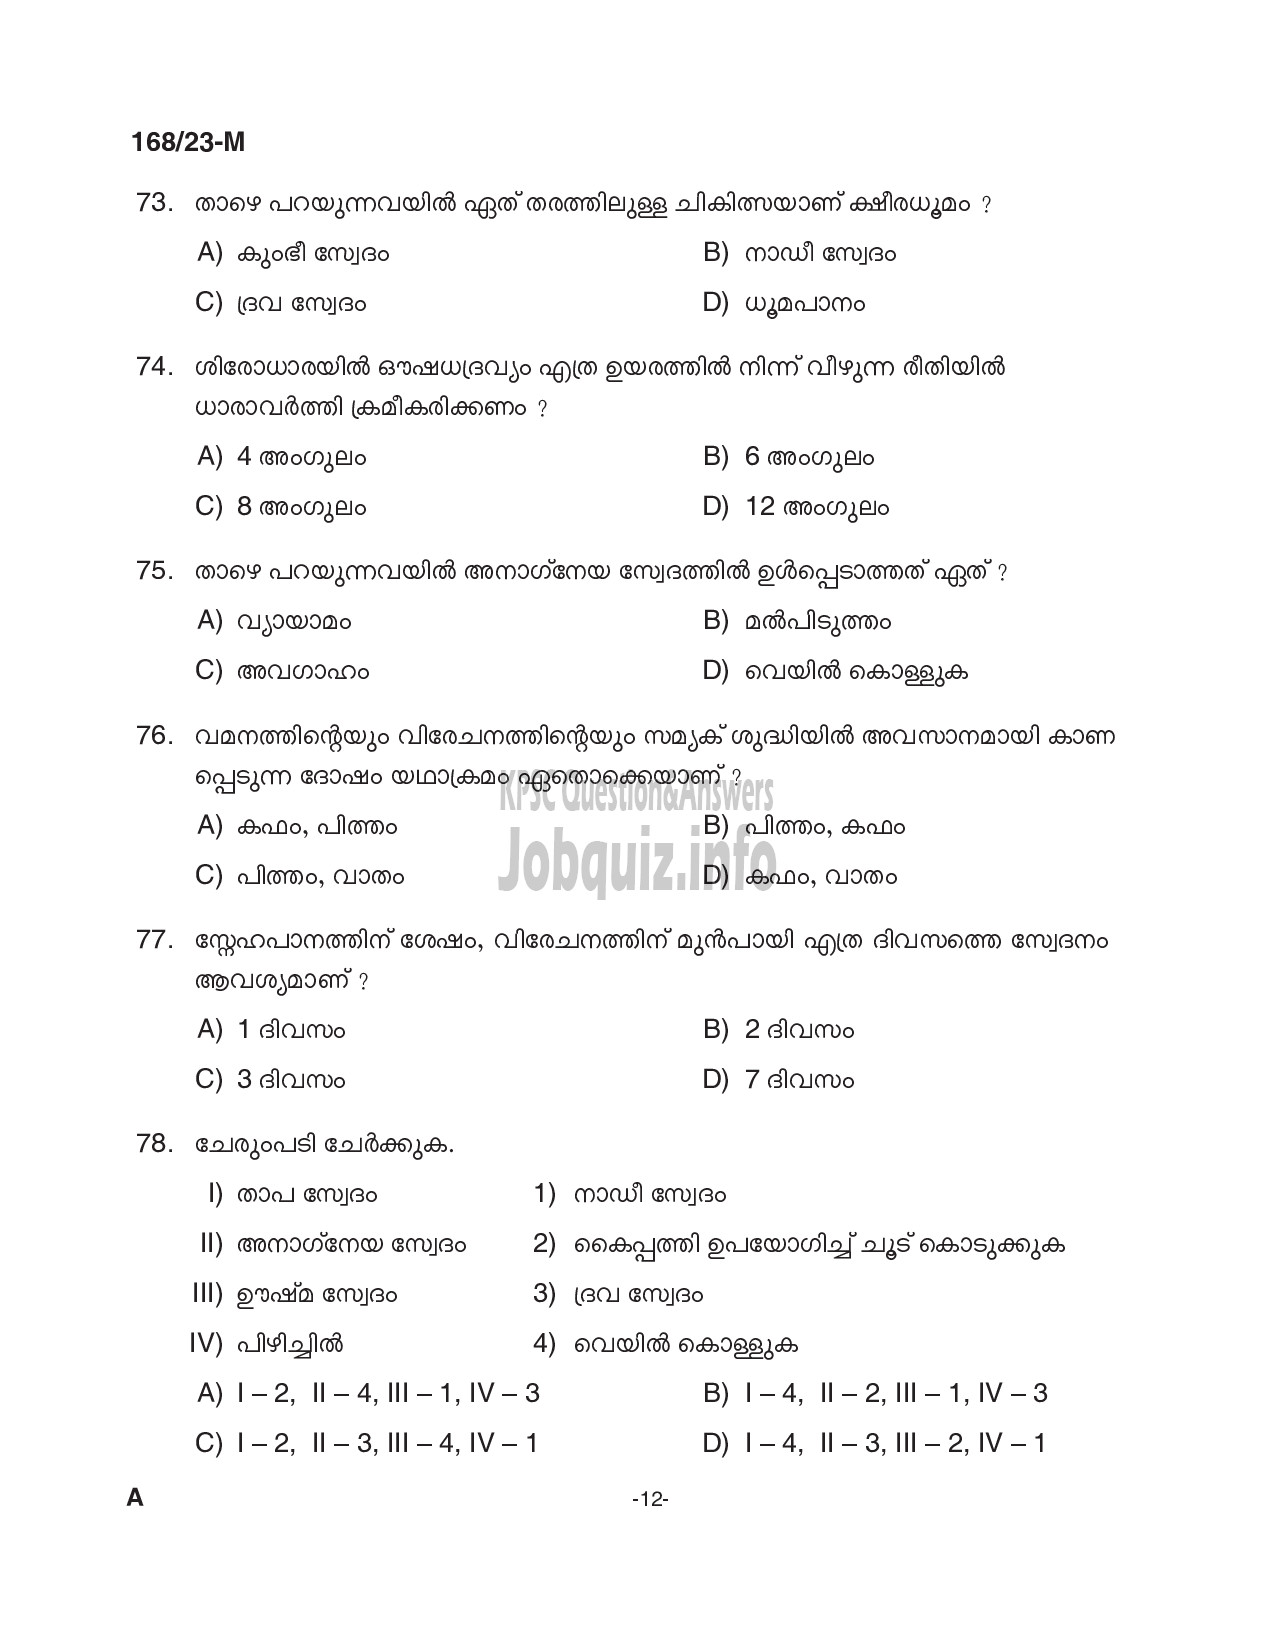 Kerala PSC Question Paper - AYURVEDA THERAPIST(Indian Systems of Medicine,Govt. Ayurveda Colleges) -12